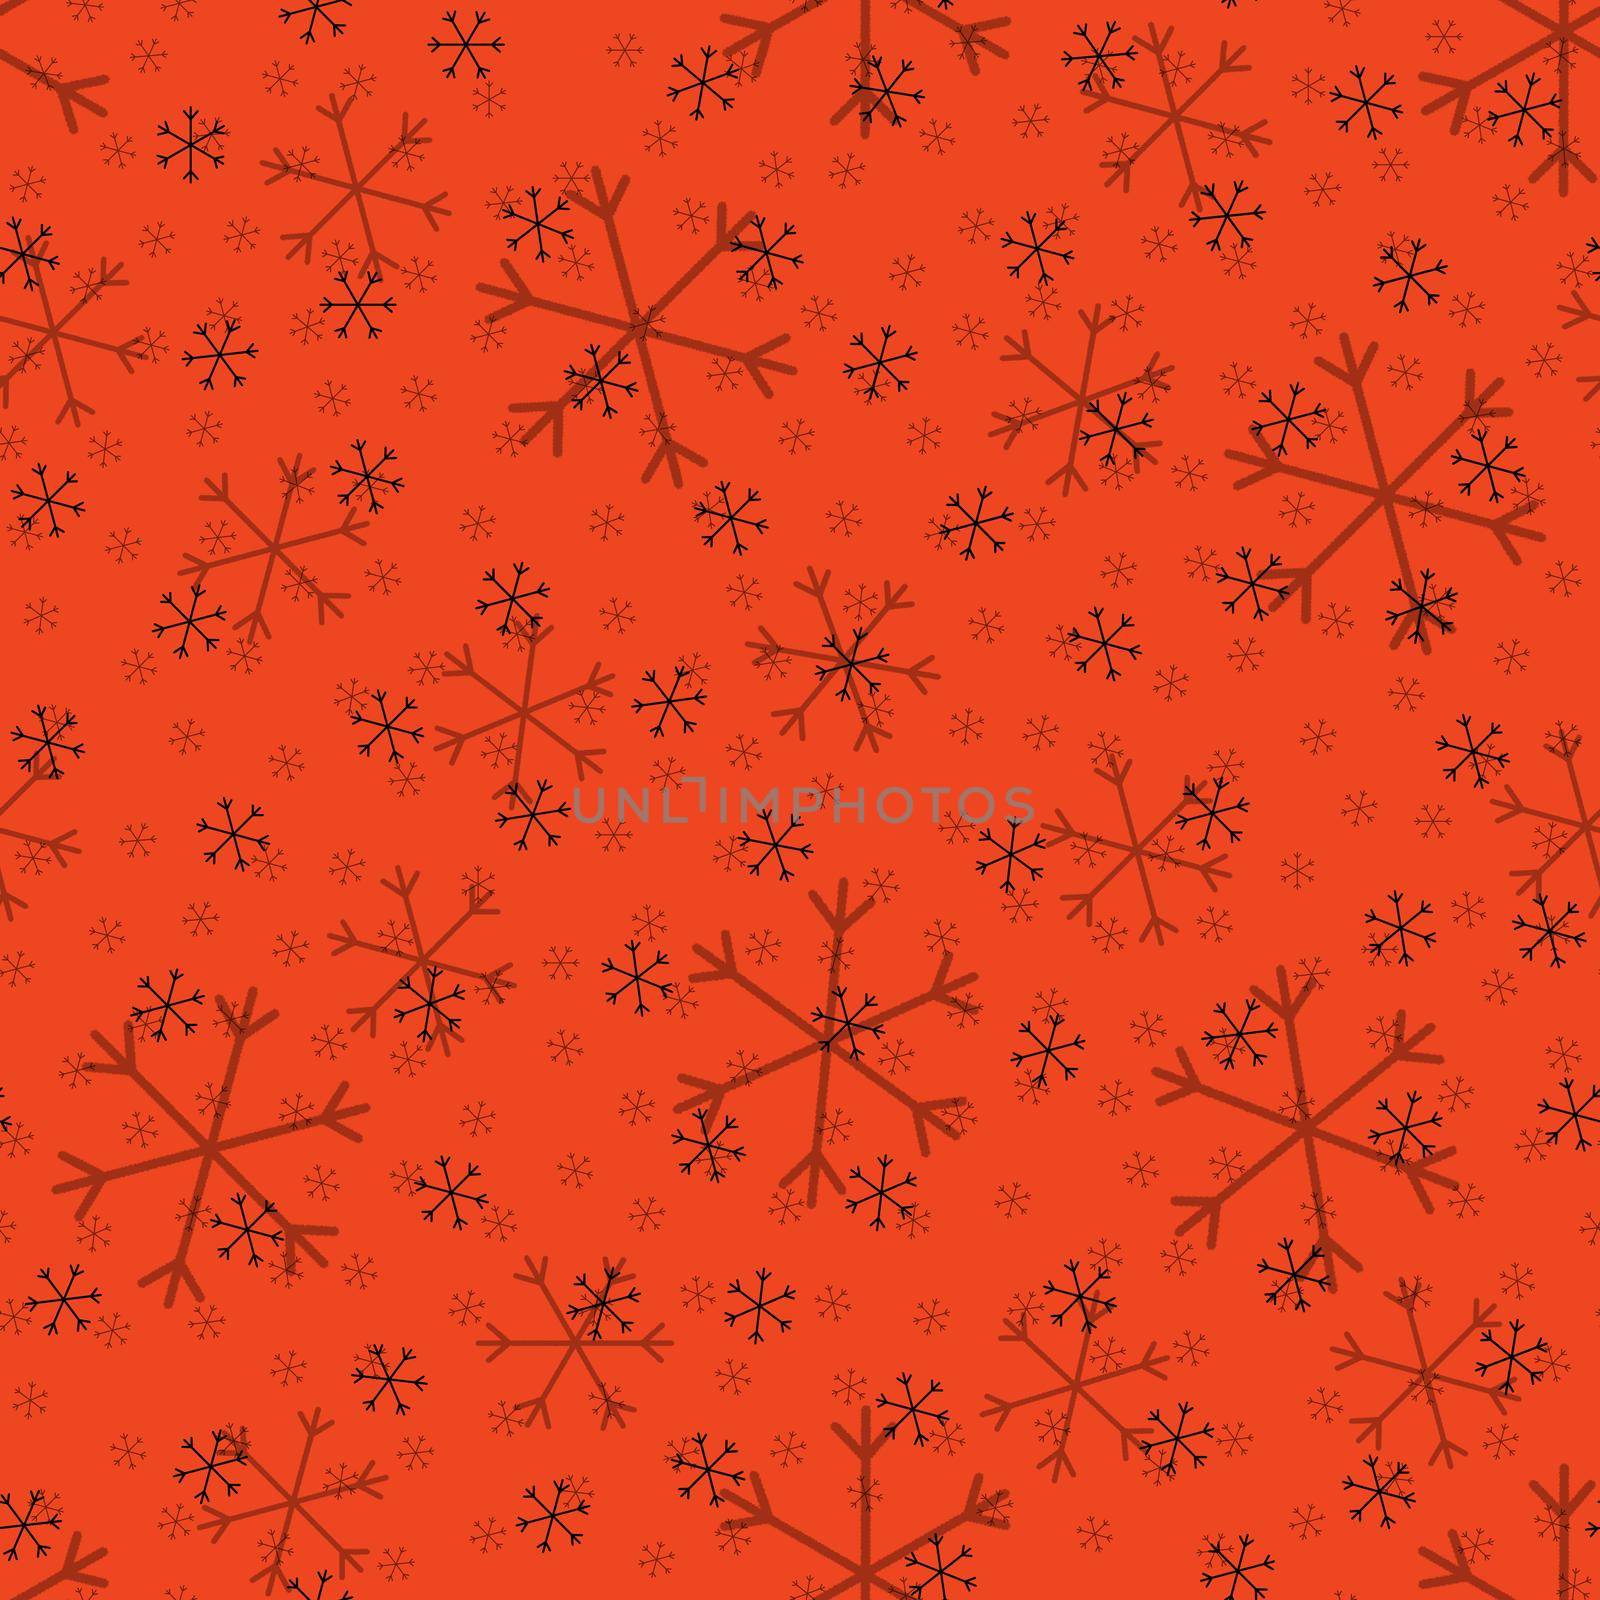 Seamless Christmas pattern doodle with hand random drawn snowflakes.Wrapping paper for presents, funny textile fabric print, design,decor, food wrap, backgrounds. new year.Raster copy.Coral, black by Angelsmoon